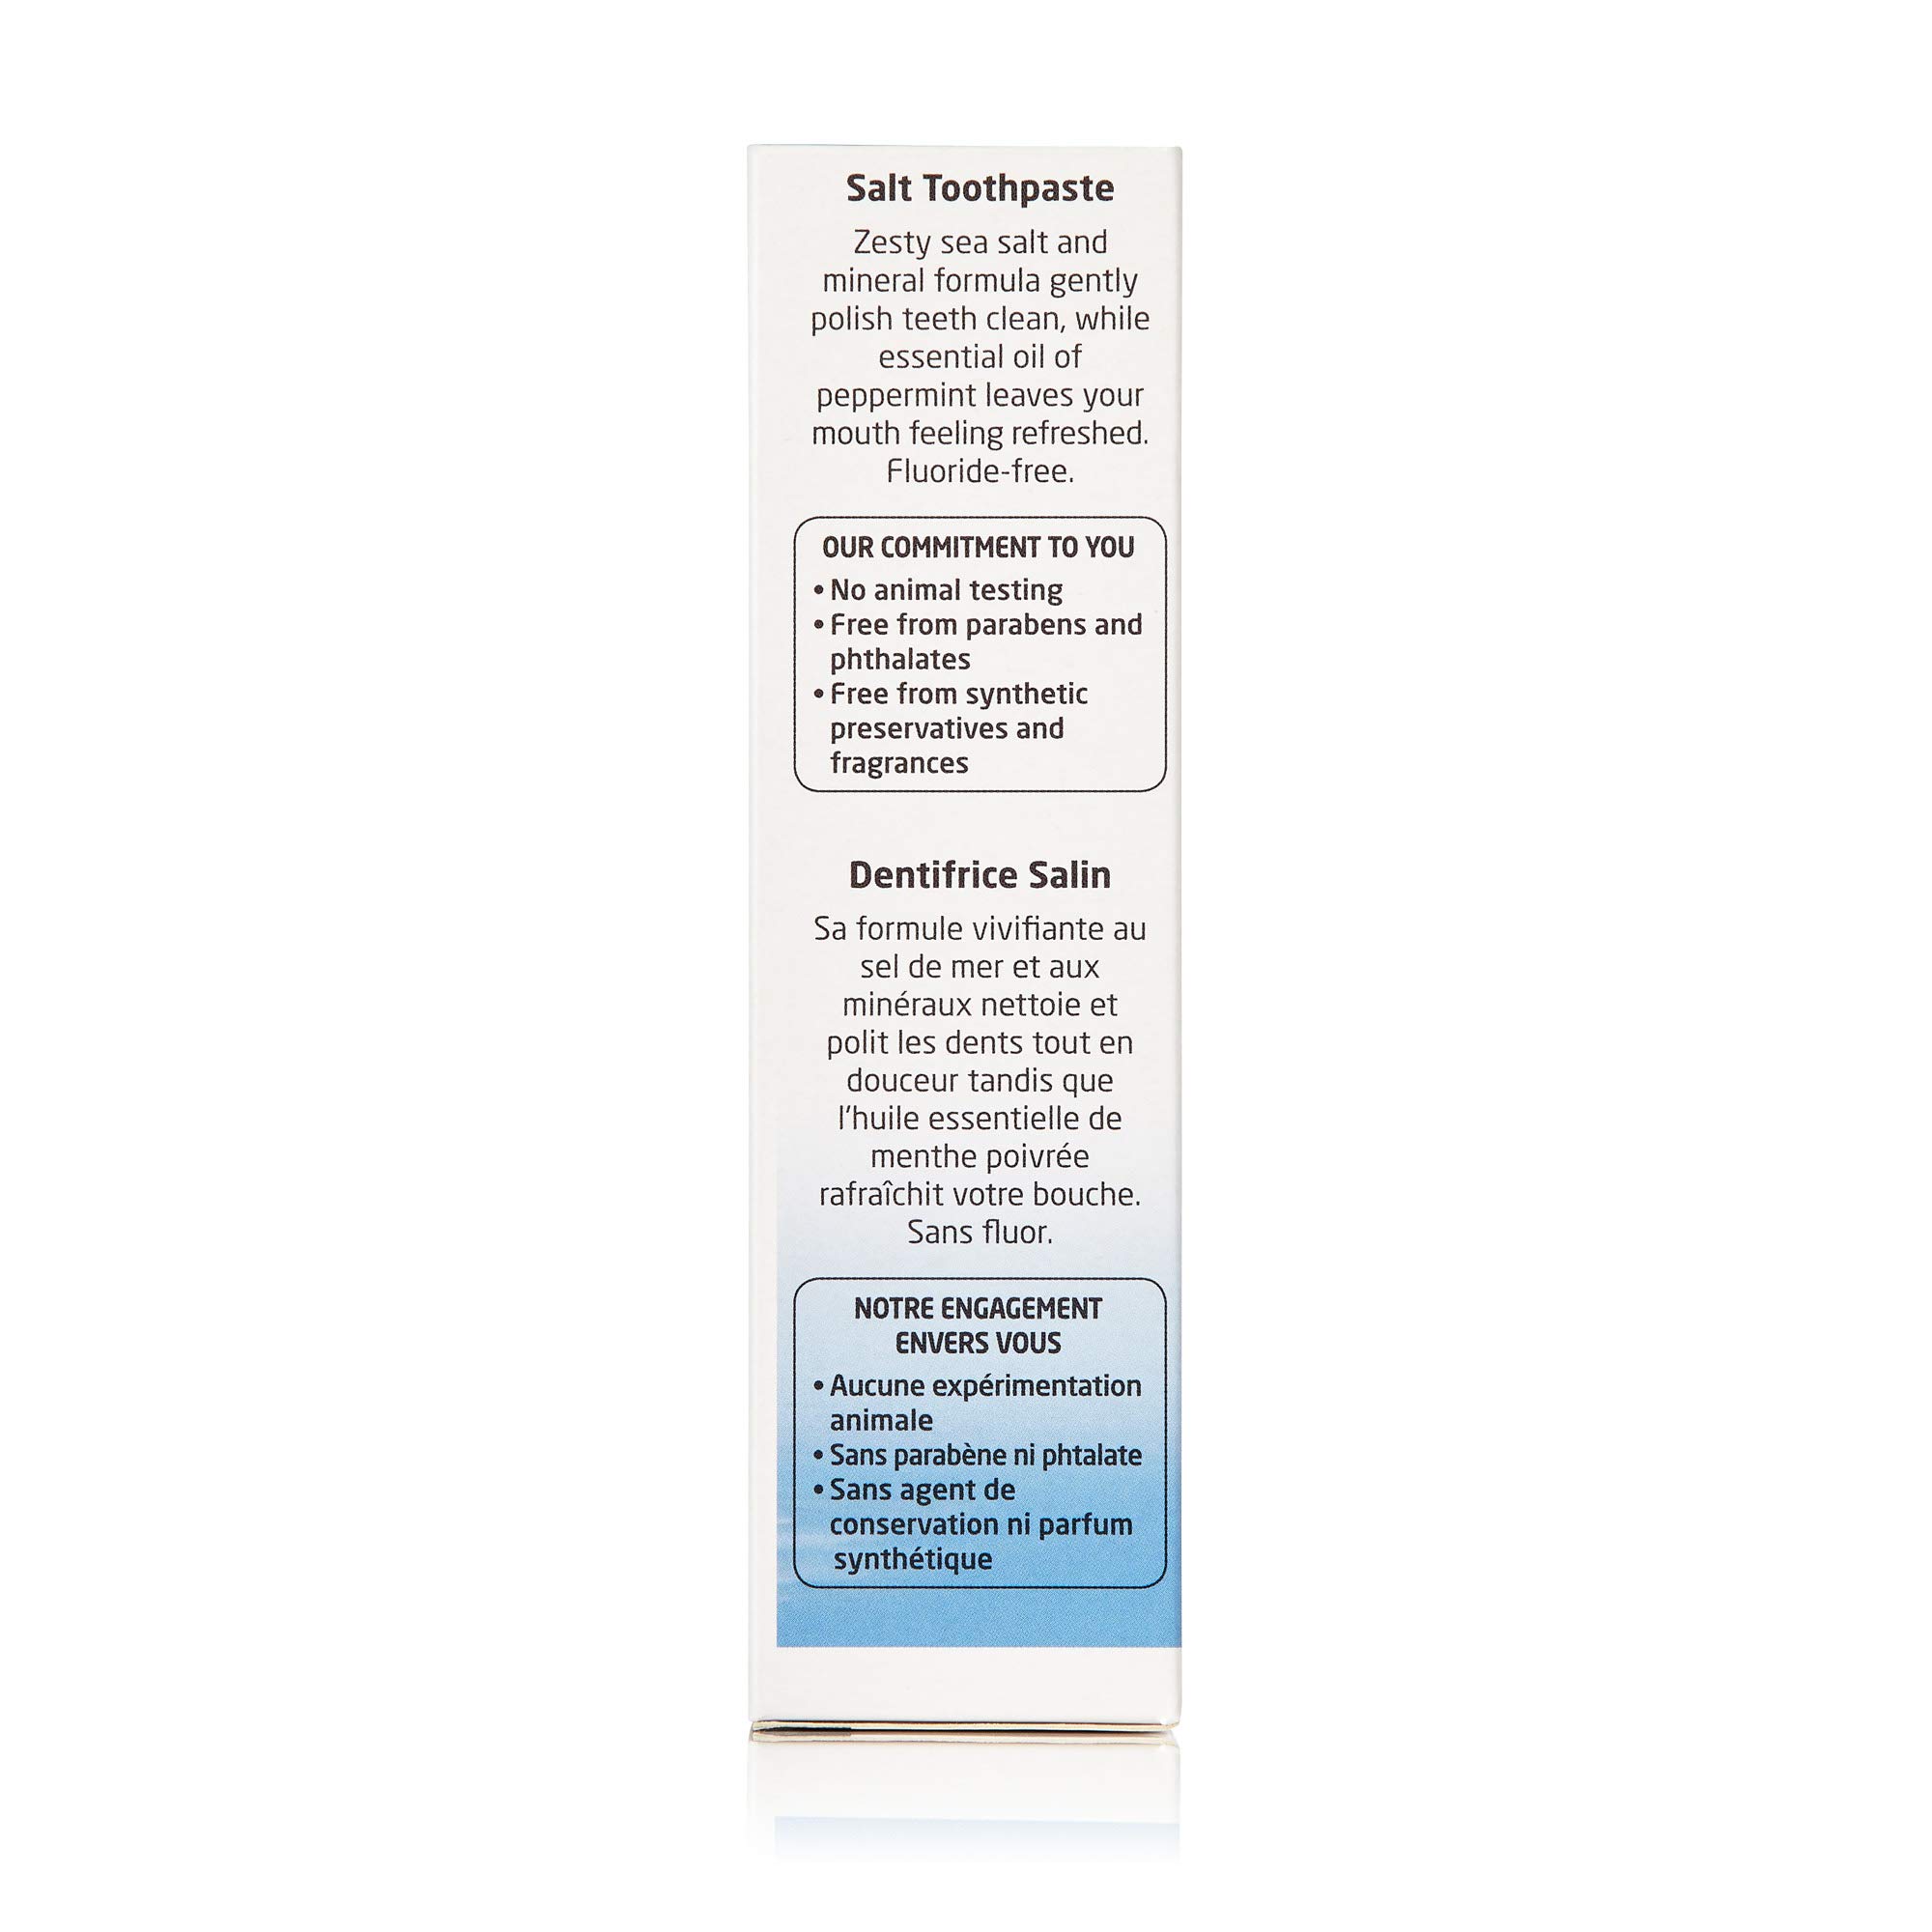 Weleda Natural Salt Toothpaste, 2.5 Ounce (Pack of 1)